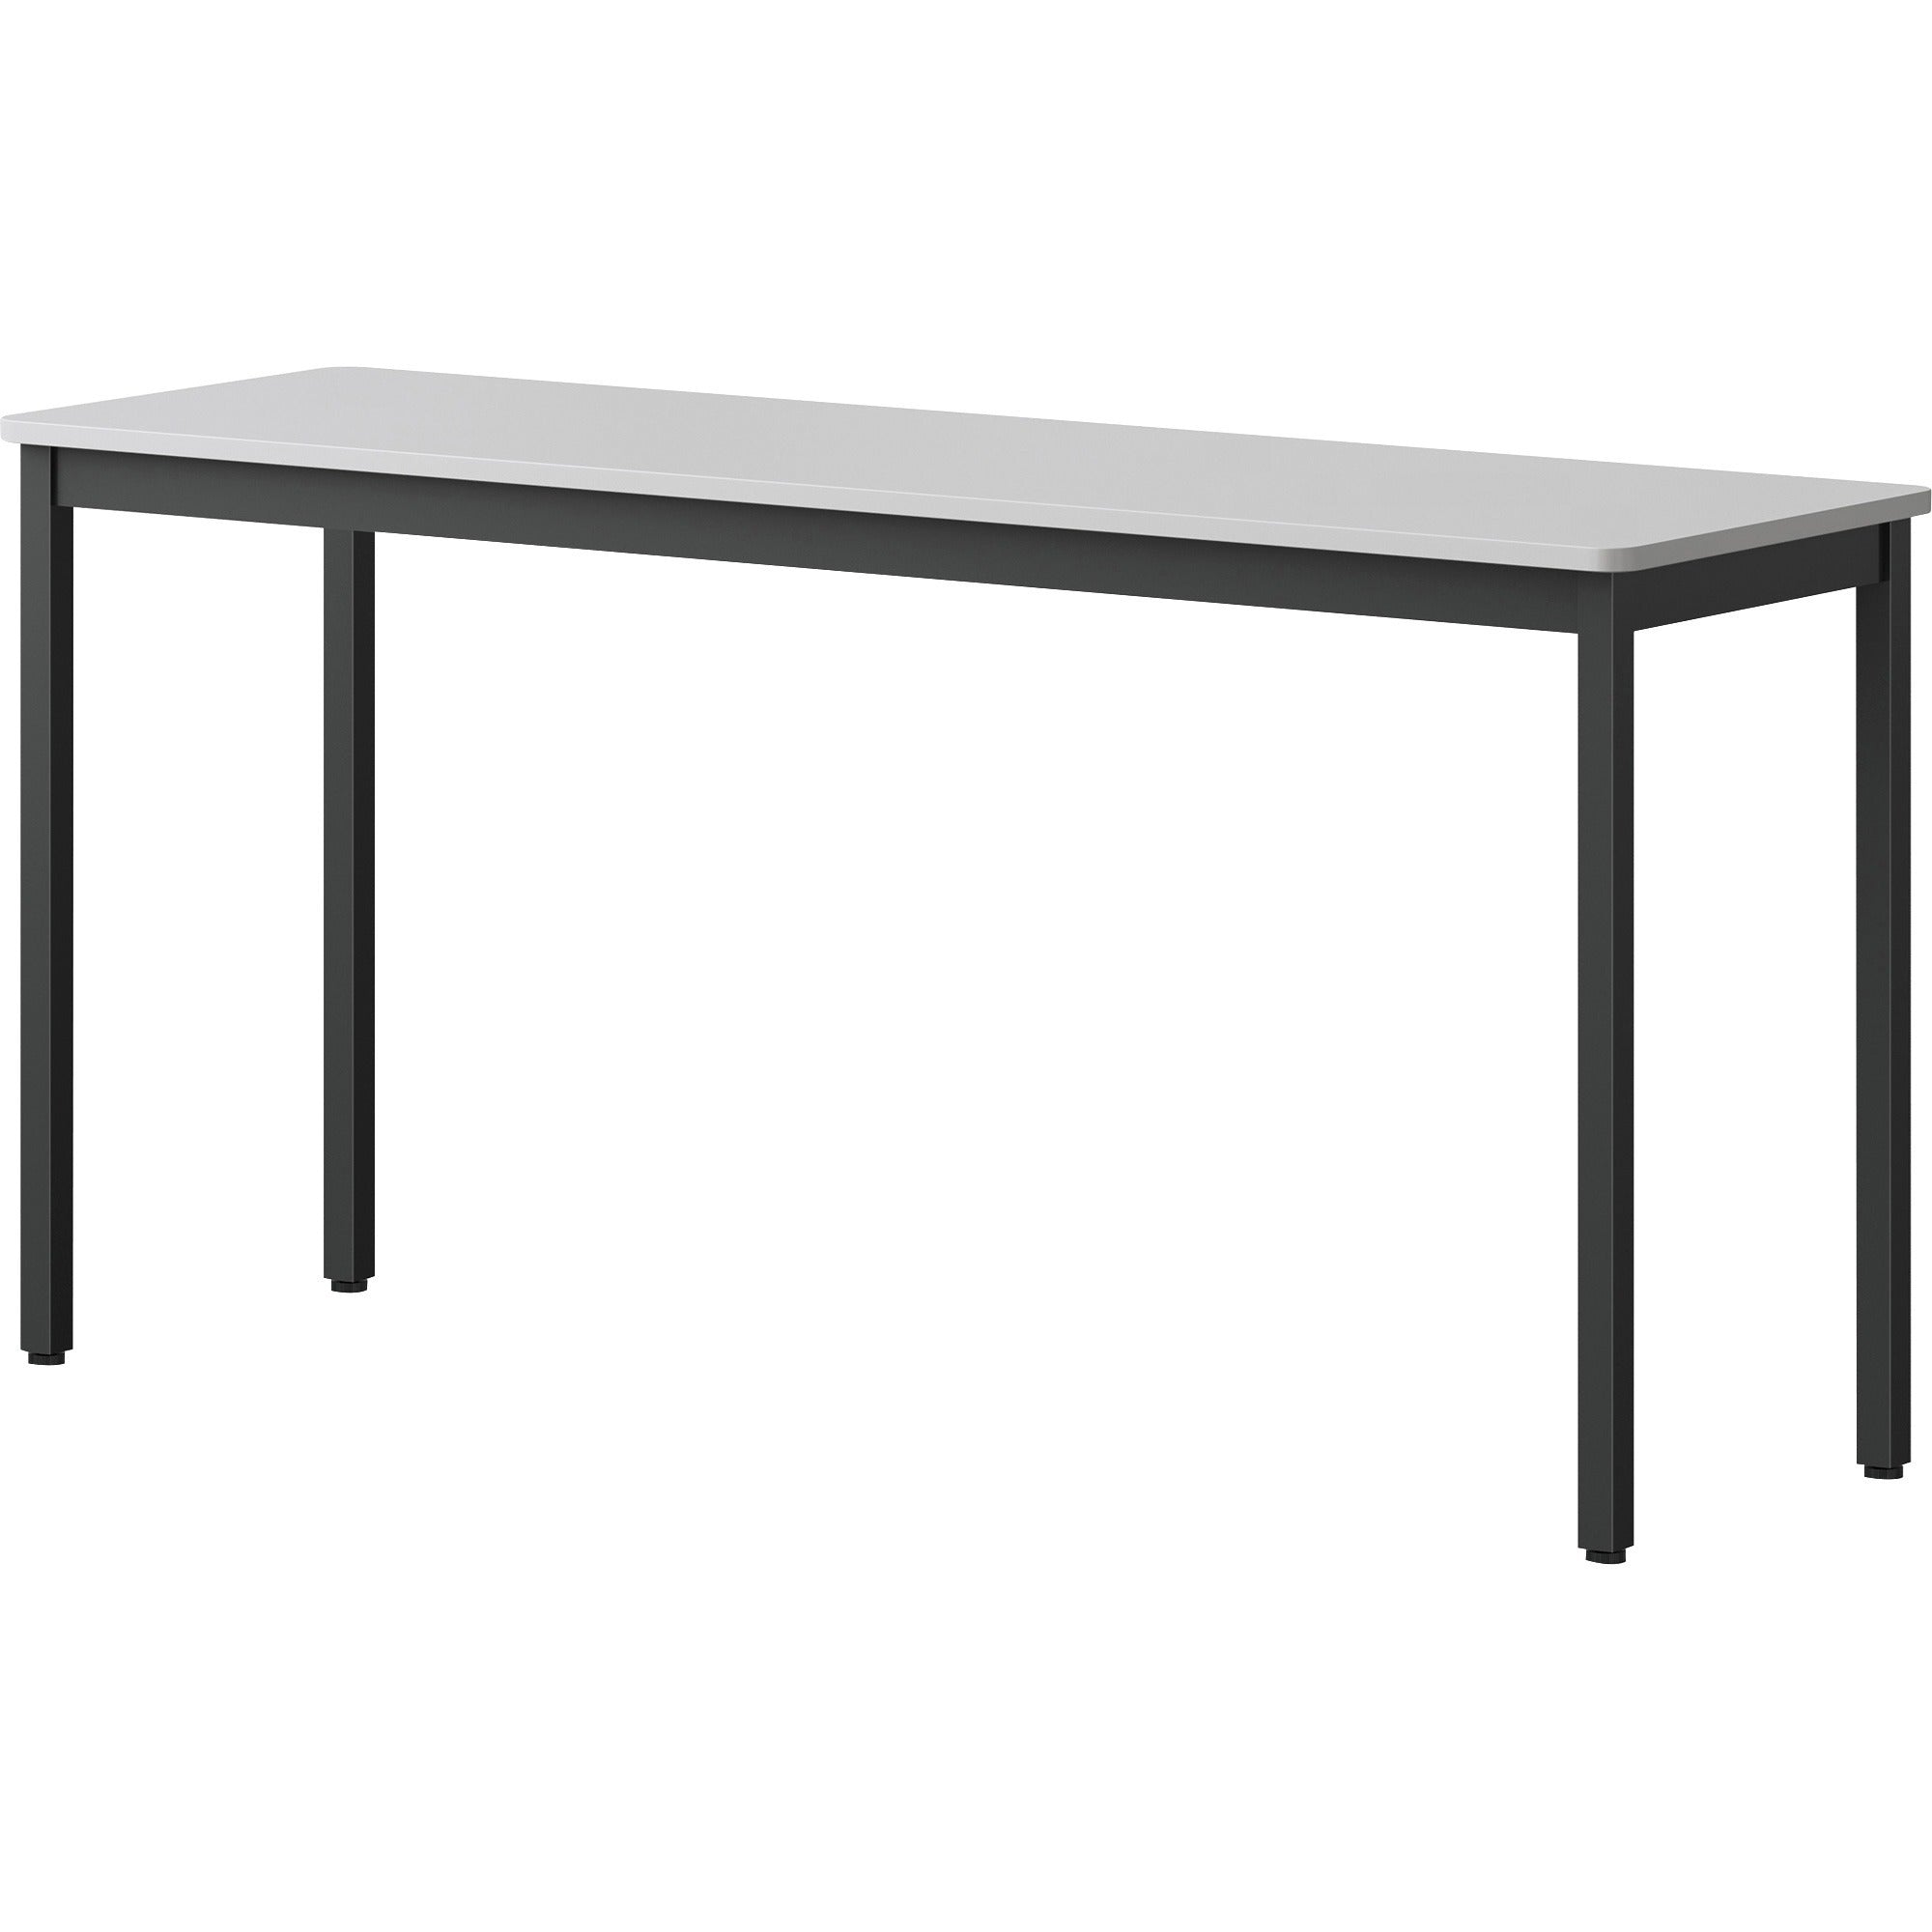 lorell-utility-table-for-table-topgray-rectangle-laminated-top-powder-coated-black-base-500-lb-capacity-x-5988-table-top-width-x-1813-table-top-depth-30-height-assembly-required-melamine-top-material-1-each_llr60754 - 3